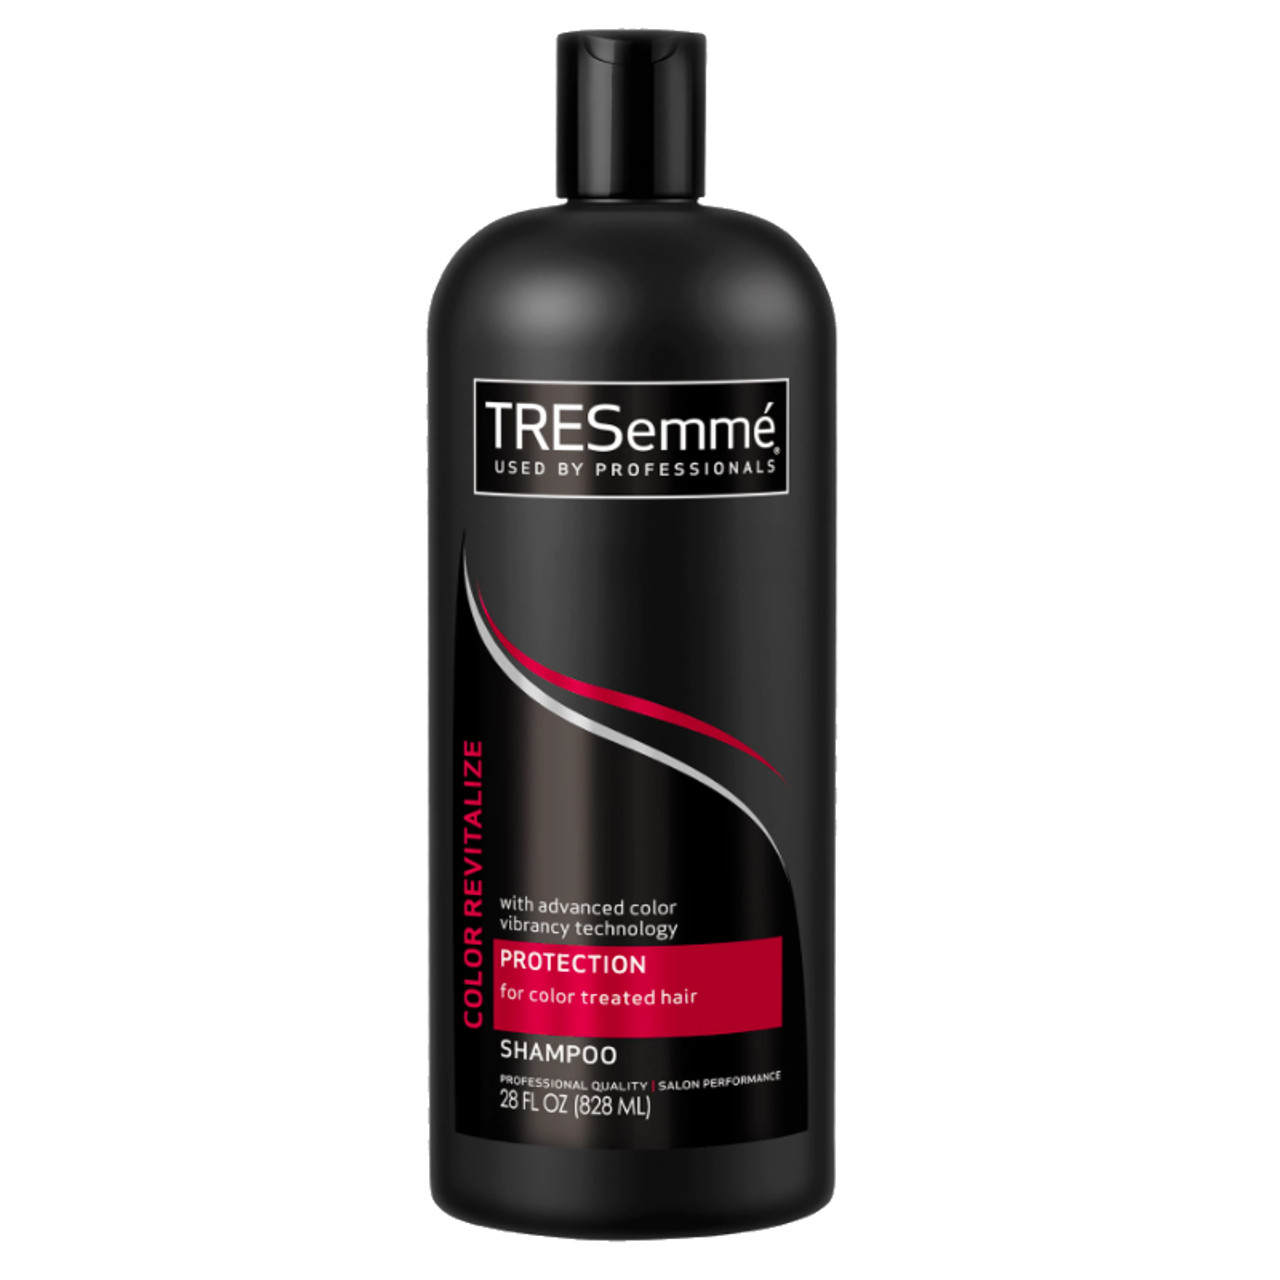 TRESemme Color Revitalize Protection Shampoo oz.) - NaturallyCurly